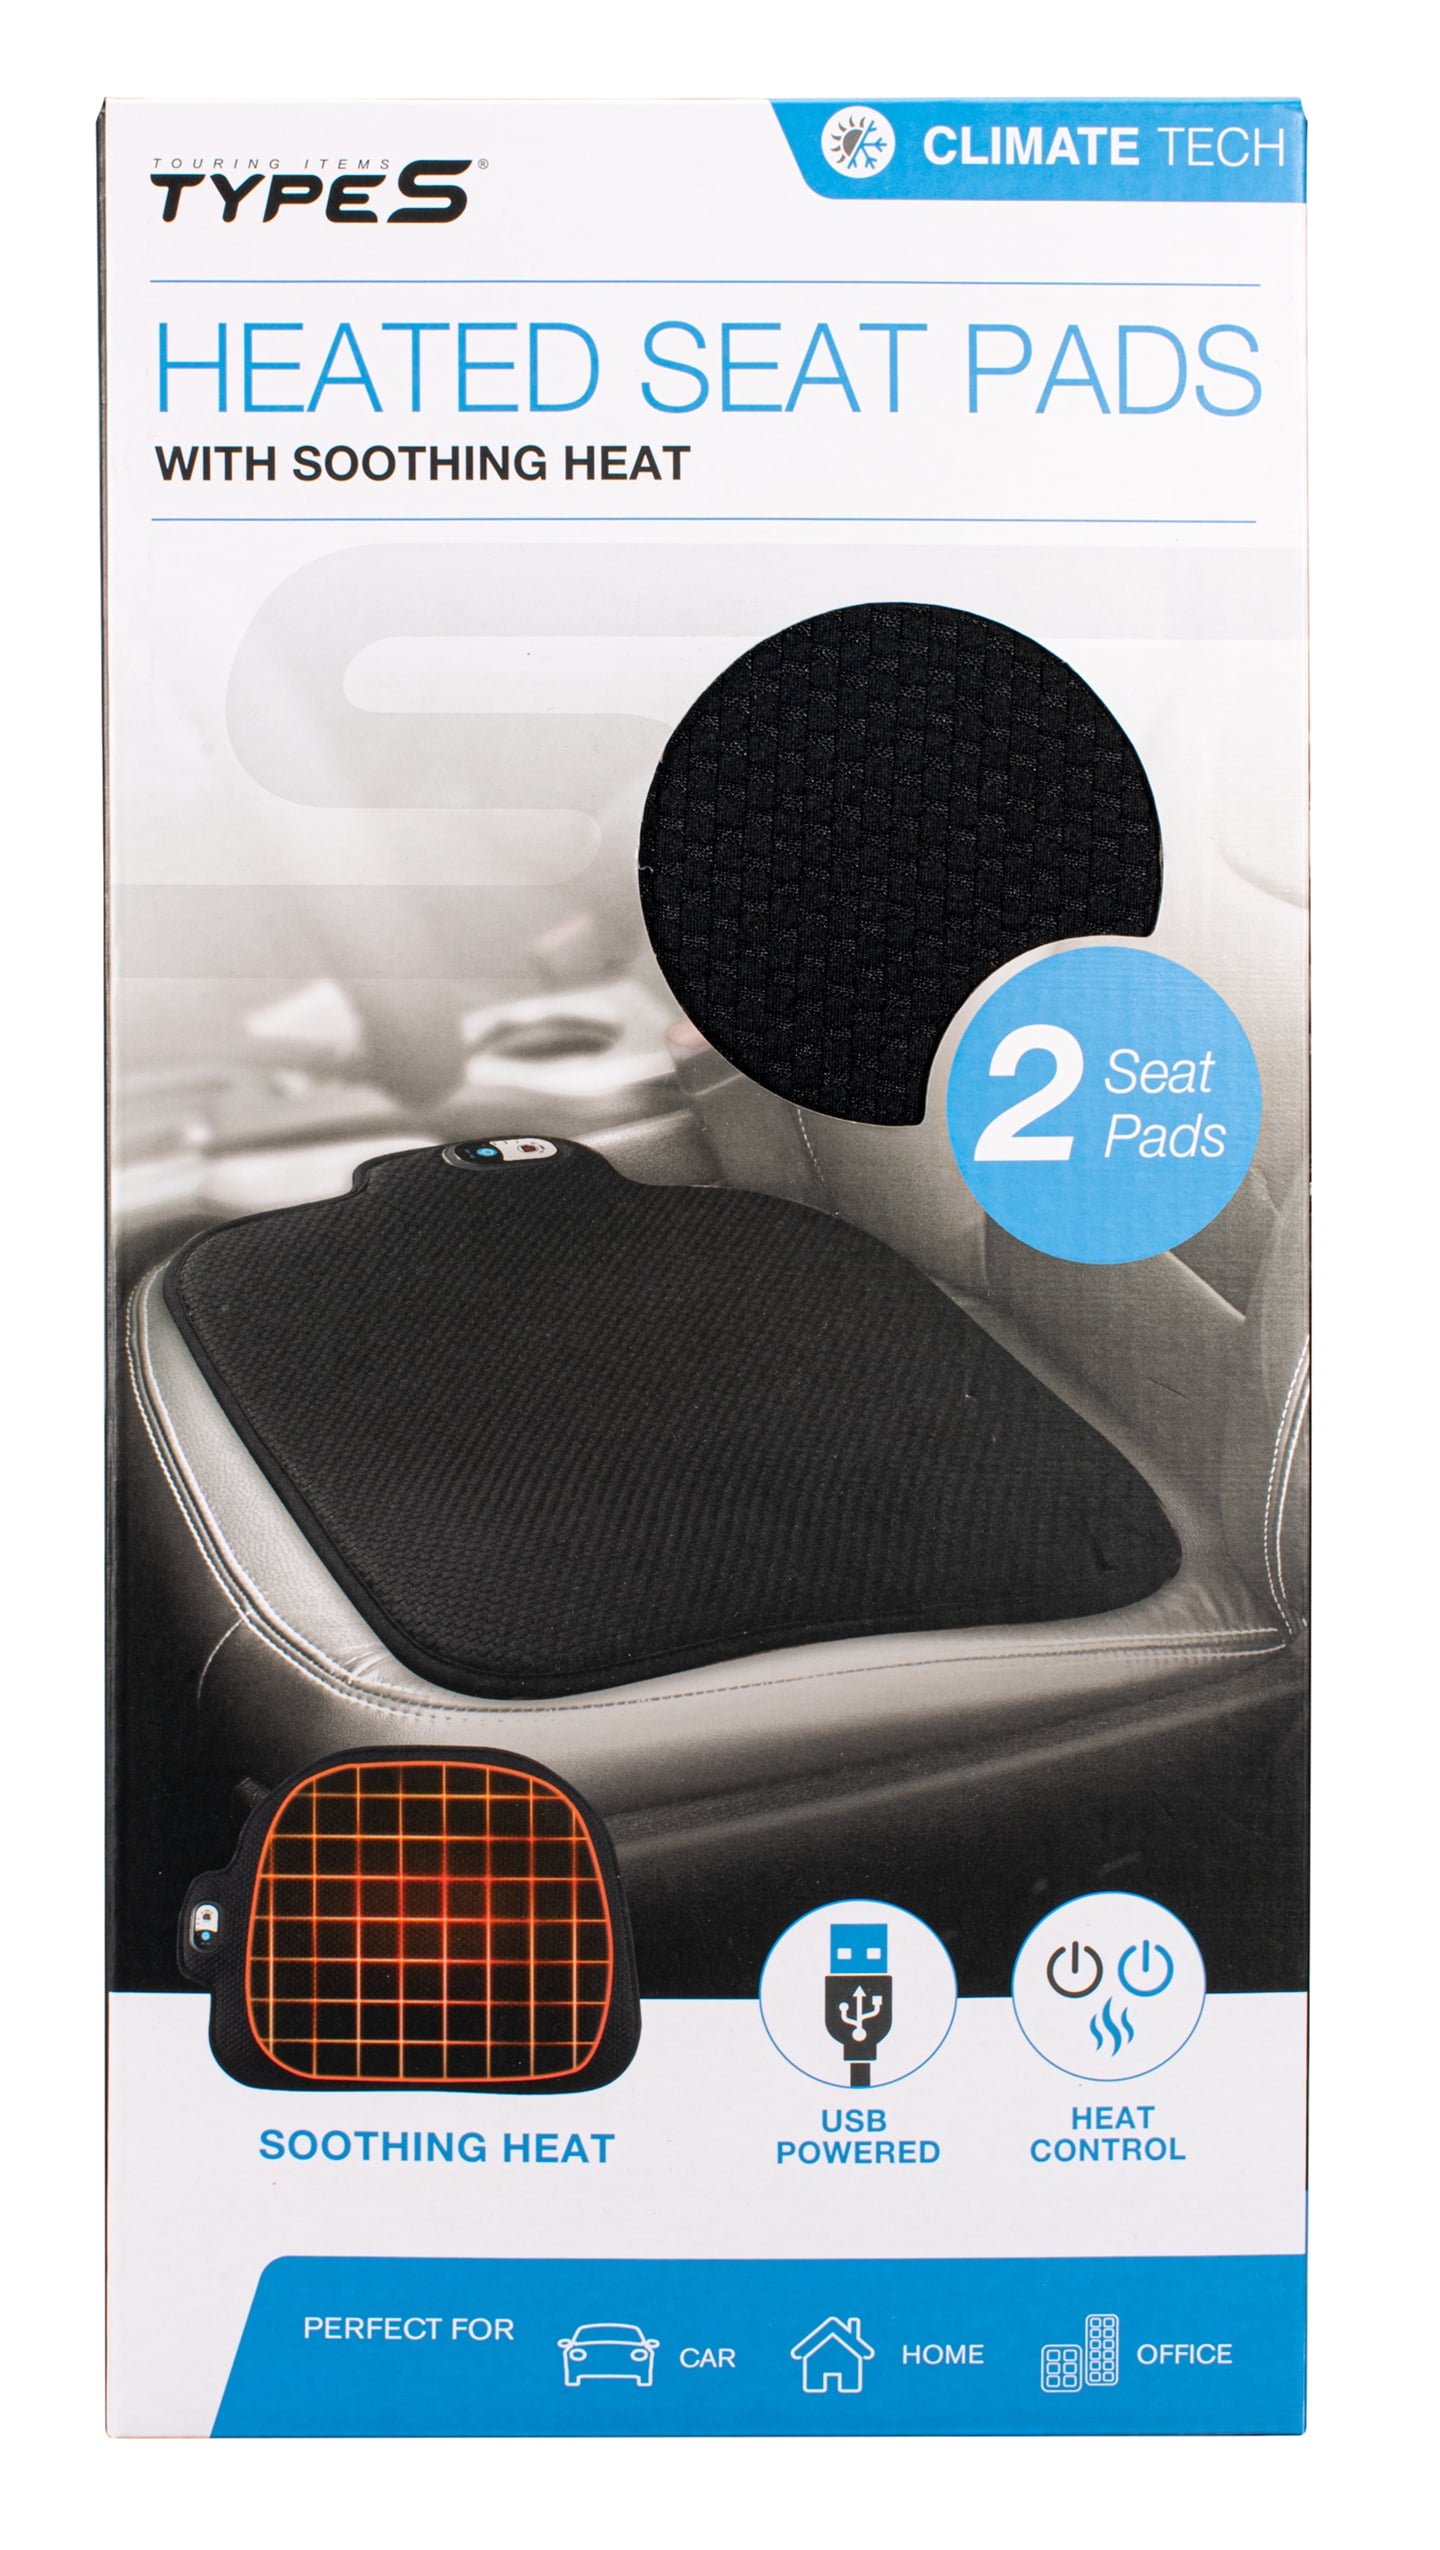 TYPE S Universal Fit Air Flow Seat Pad Seat Cushion Seat Cover, Black,  Multi-Layer Air Flow, 